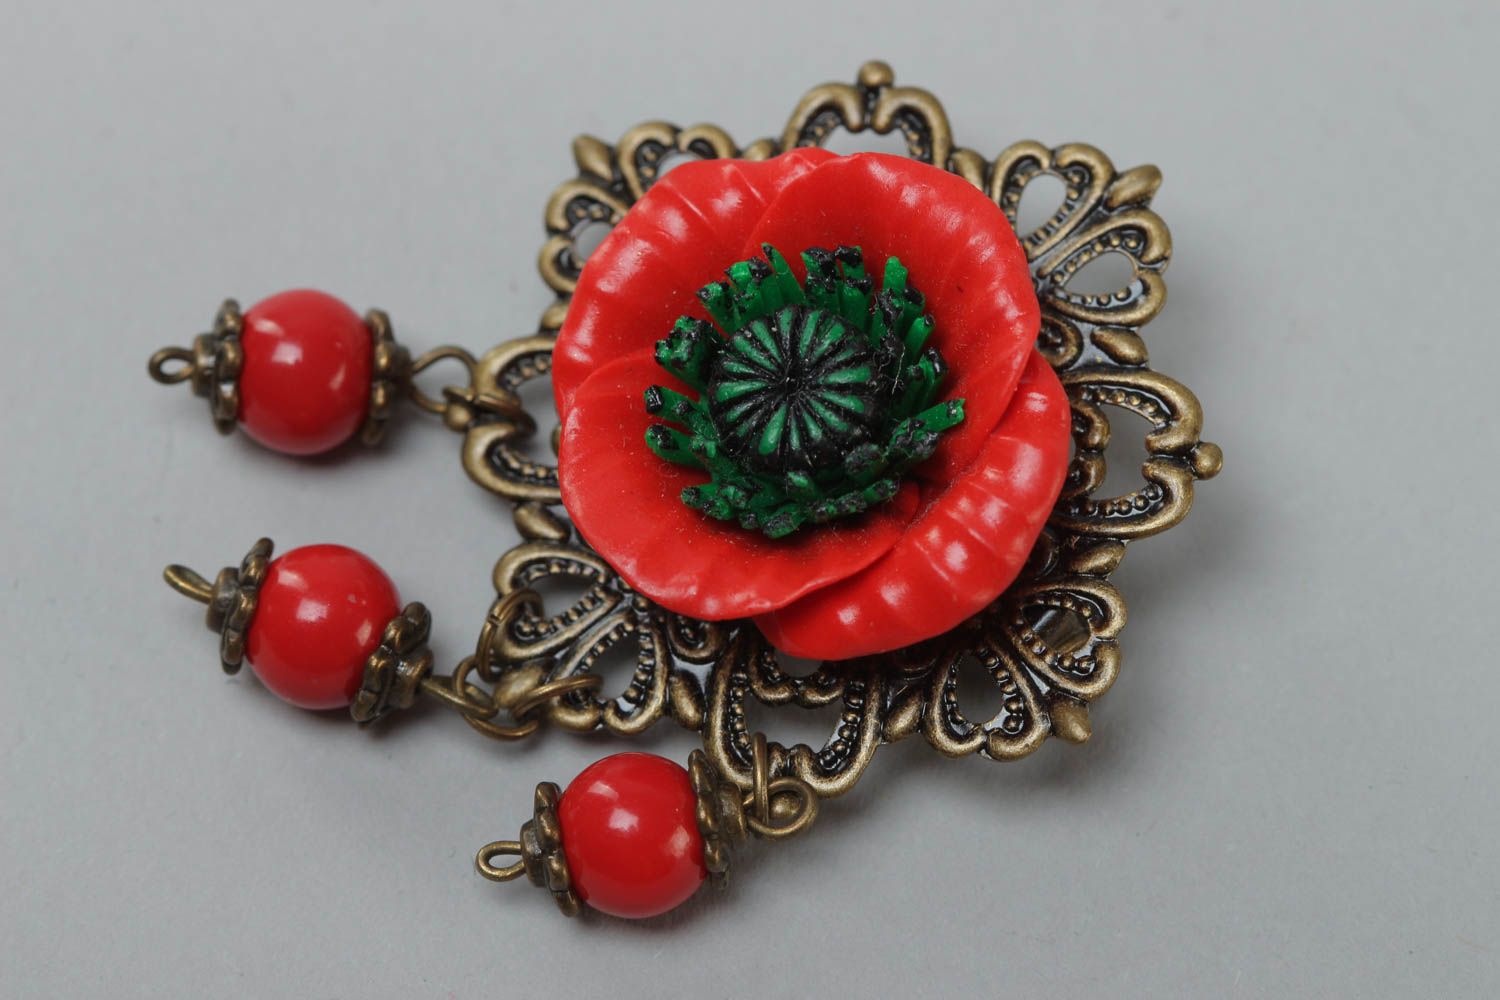 Handmade polymer clay brooch with metal basis in the shape of red and black poppy photo 2